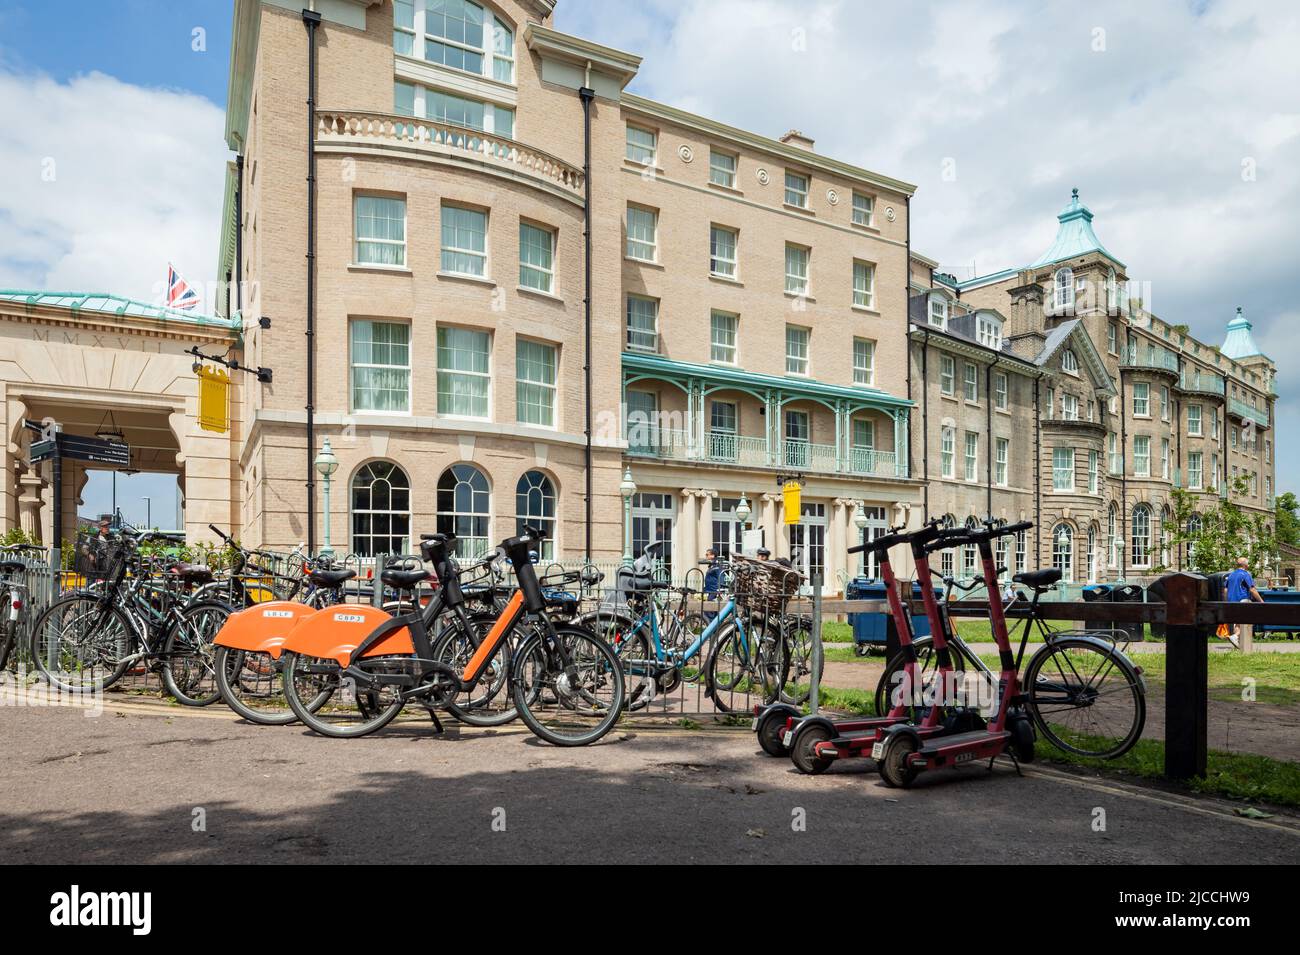 Bicycles parked in front of University Arms Hotel, Cambridge, England. Stock Photo